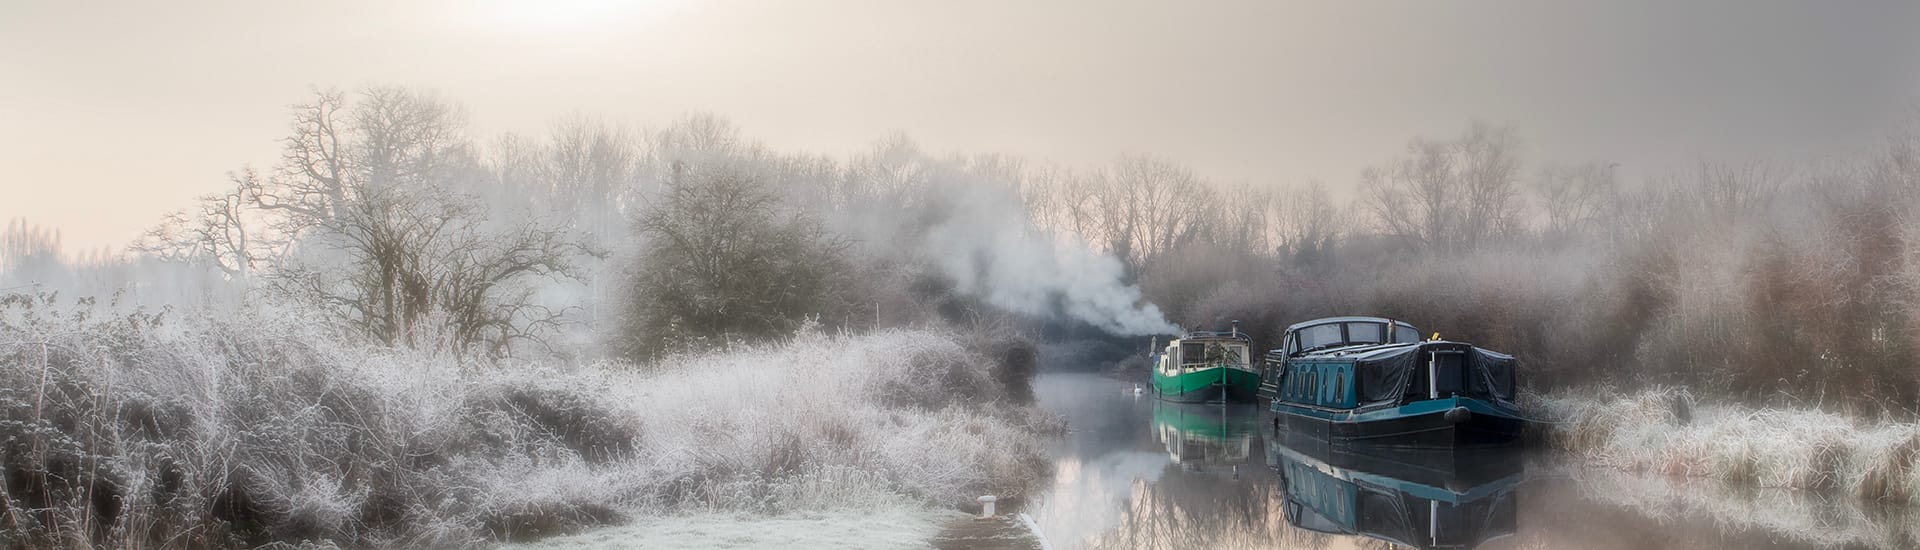 winter photography along the Kennet and Avon Canal by Stephen Paul Young